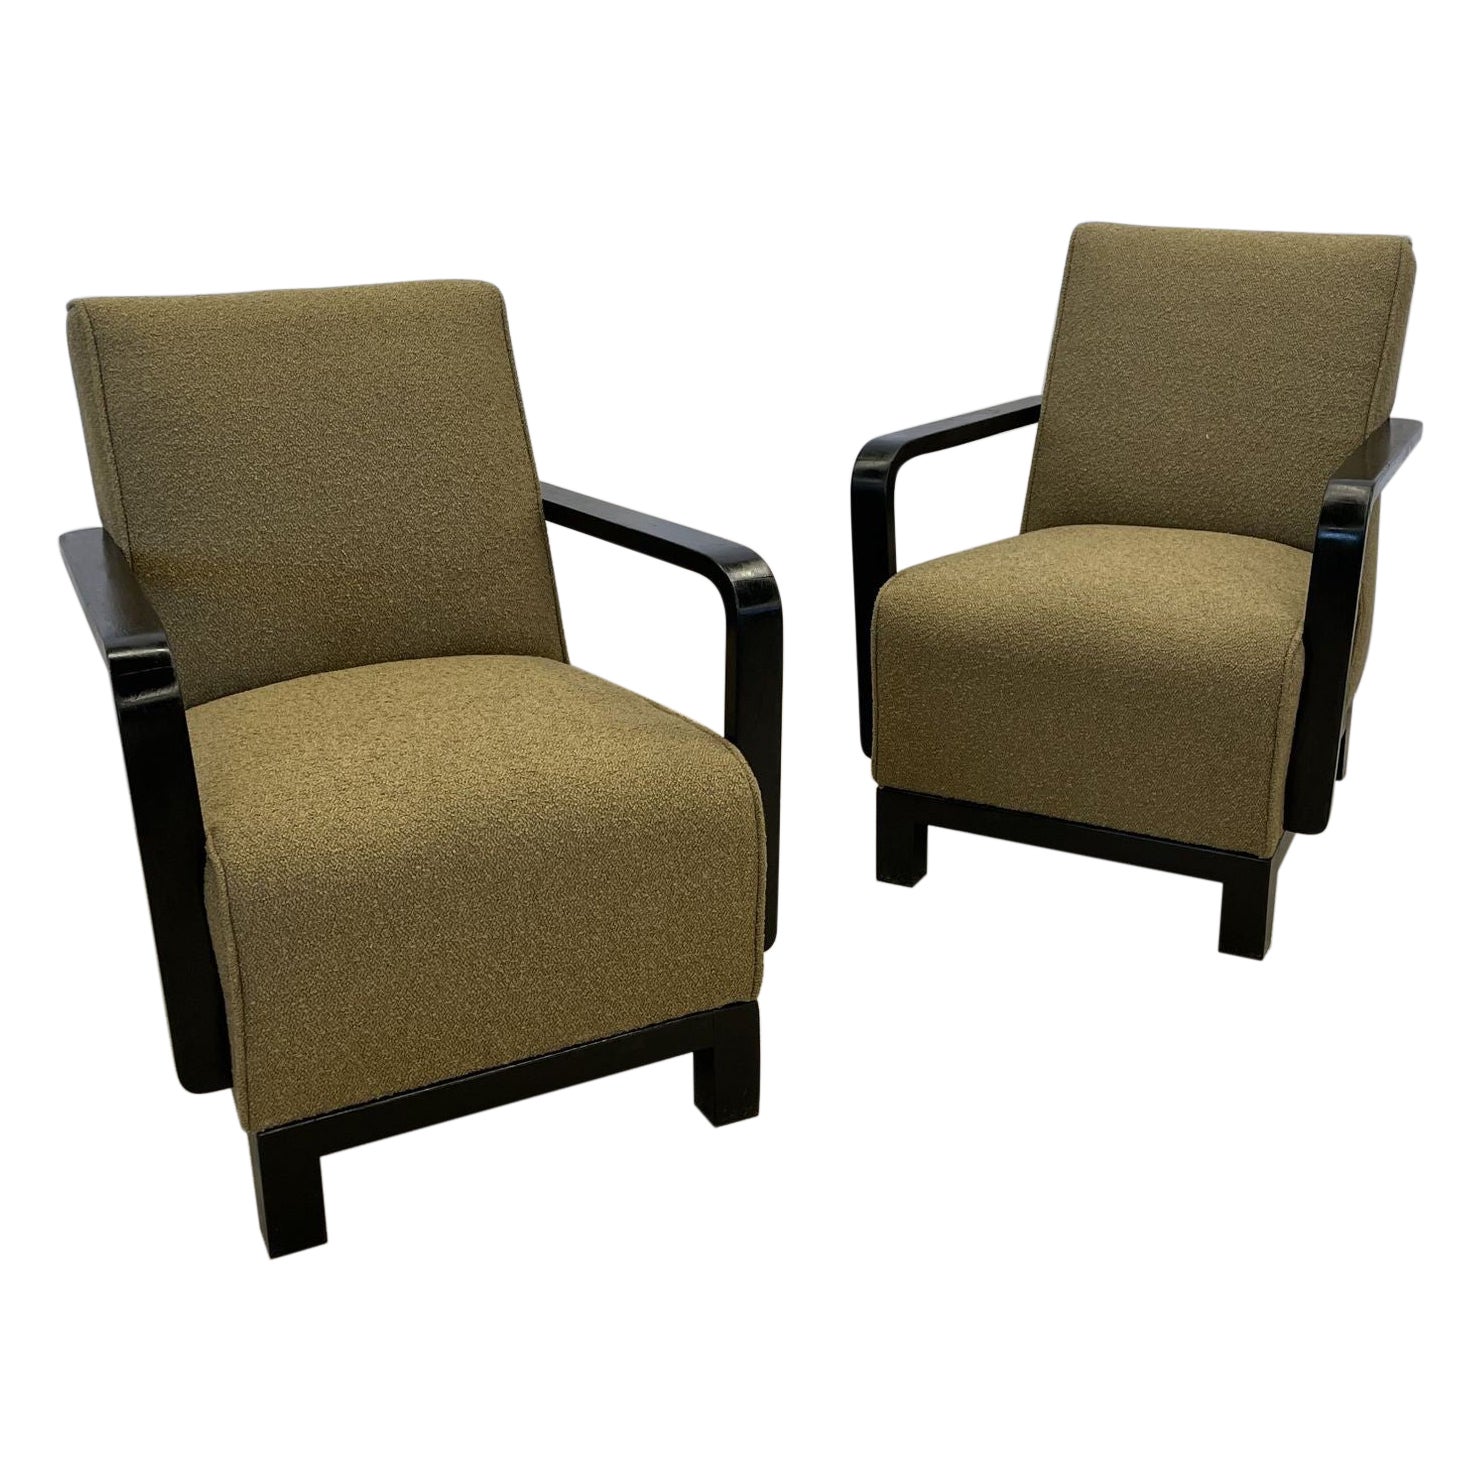 Pair of Vintage Art Deco Lounge / Arm Chairs, Ebony Wood, Boucle, Sweden, 1940s For Sale